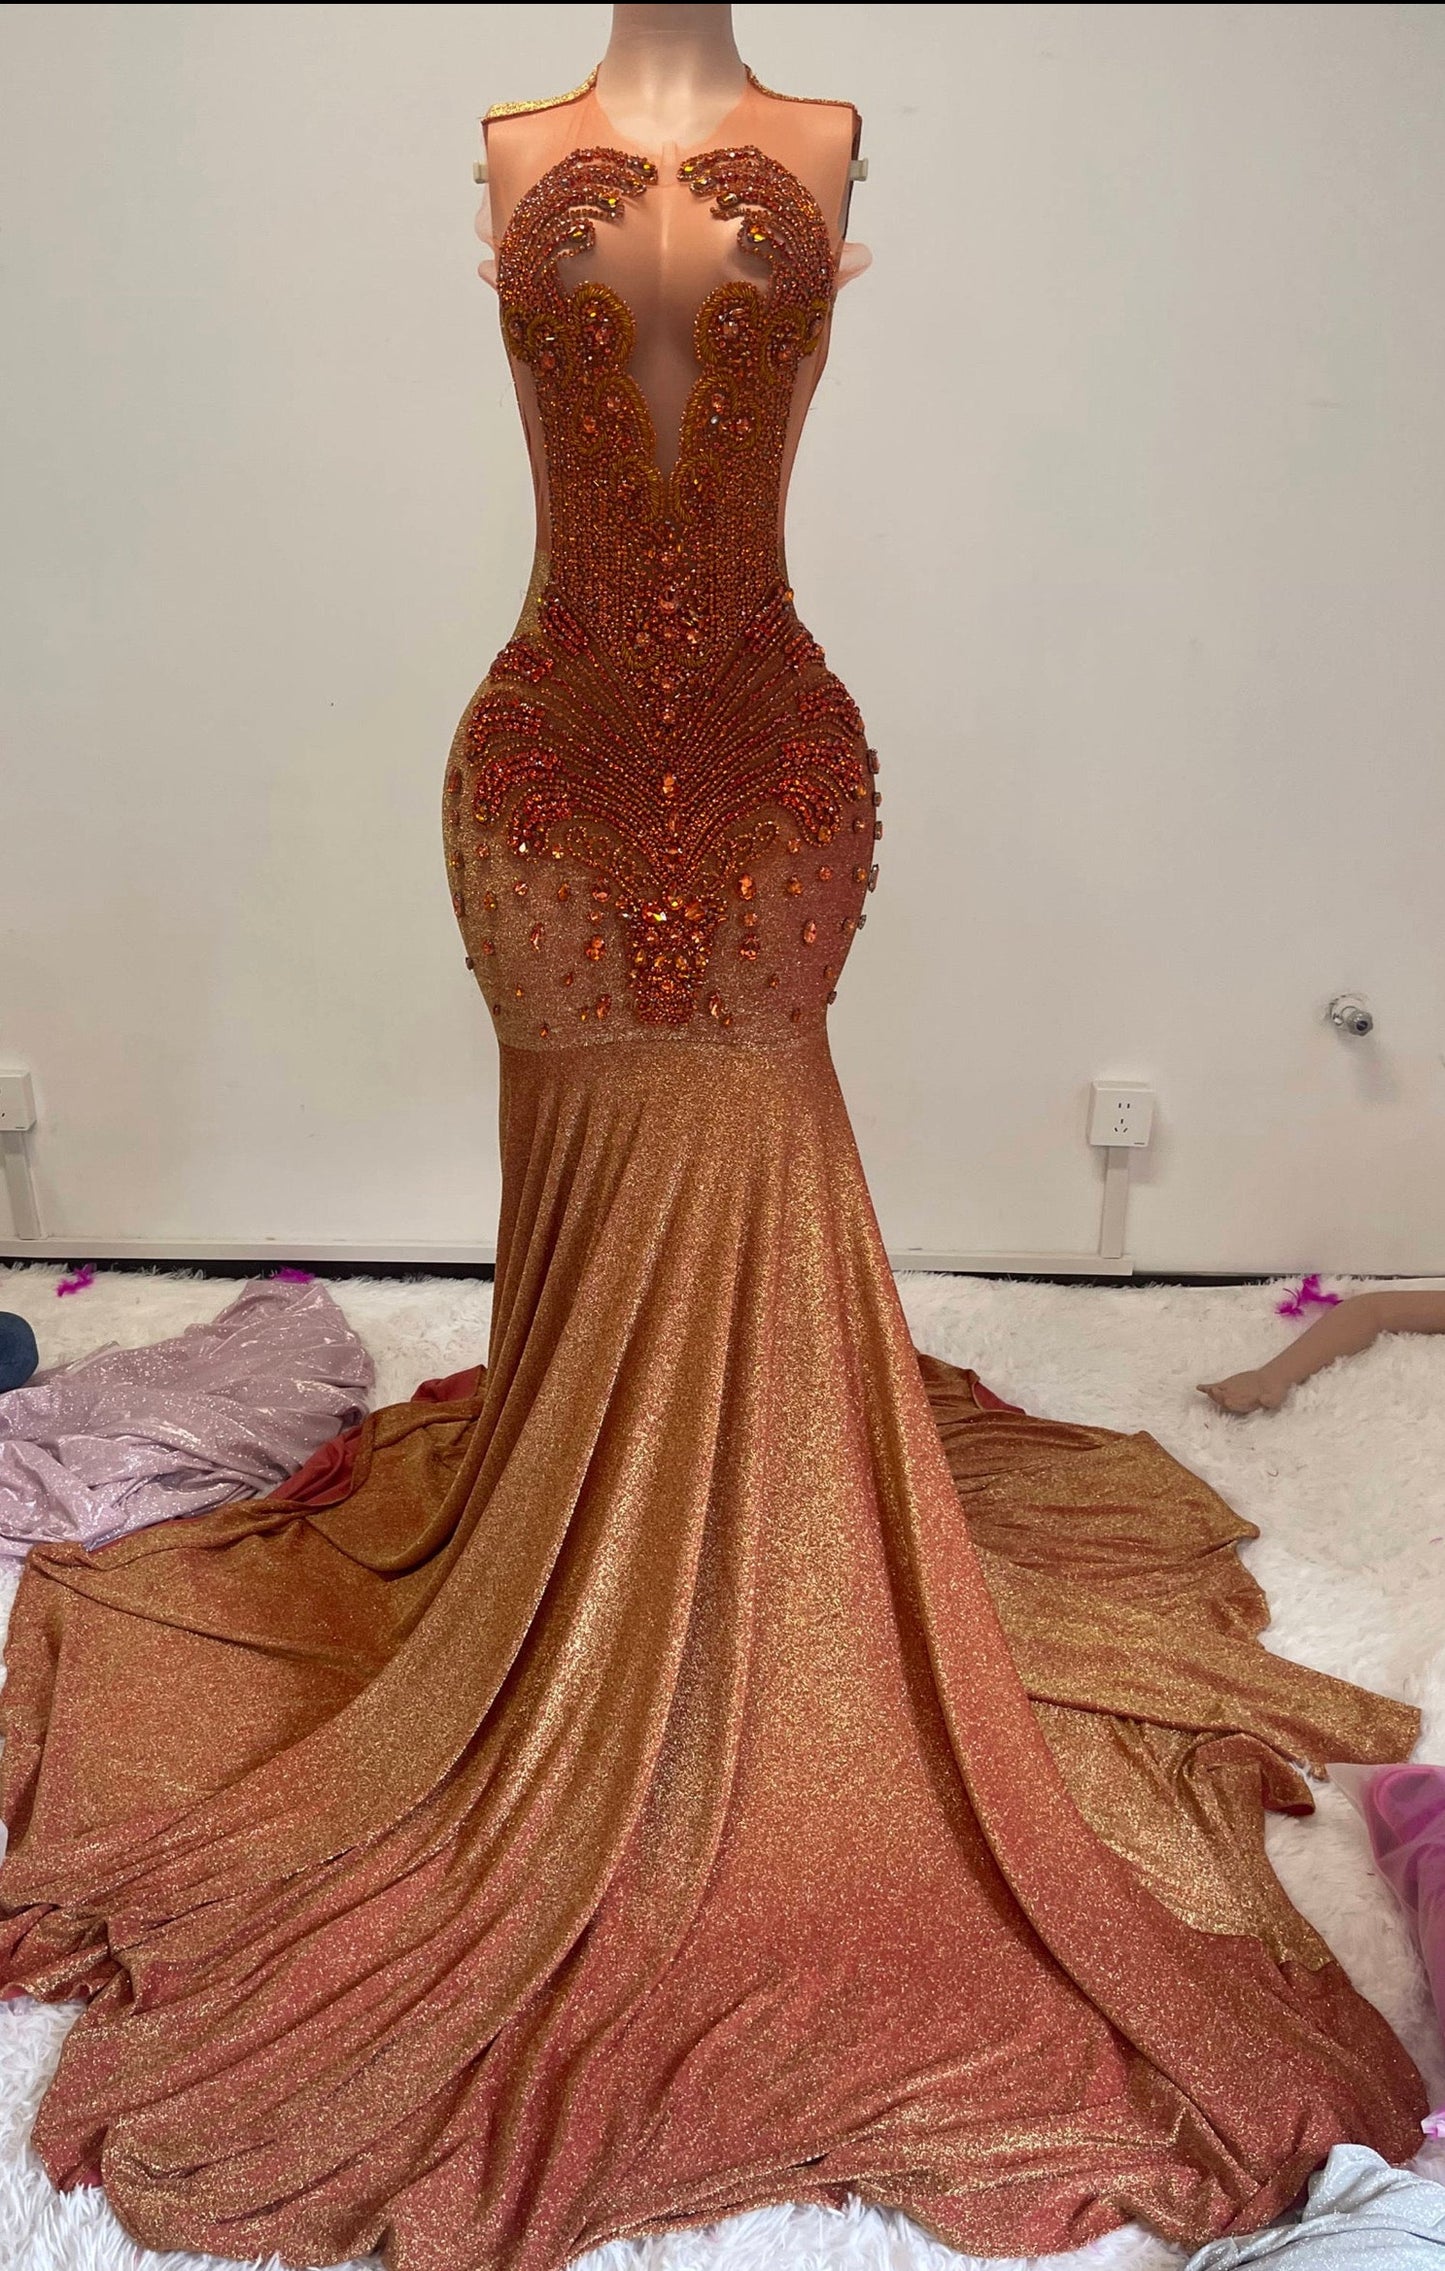 “Onyx 2.0 ” Gown